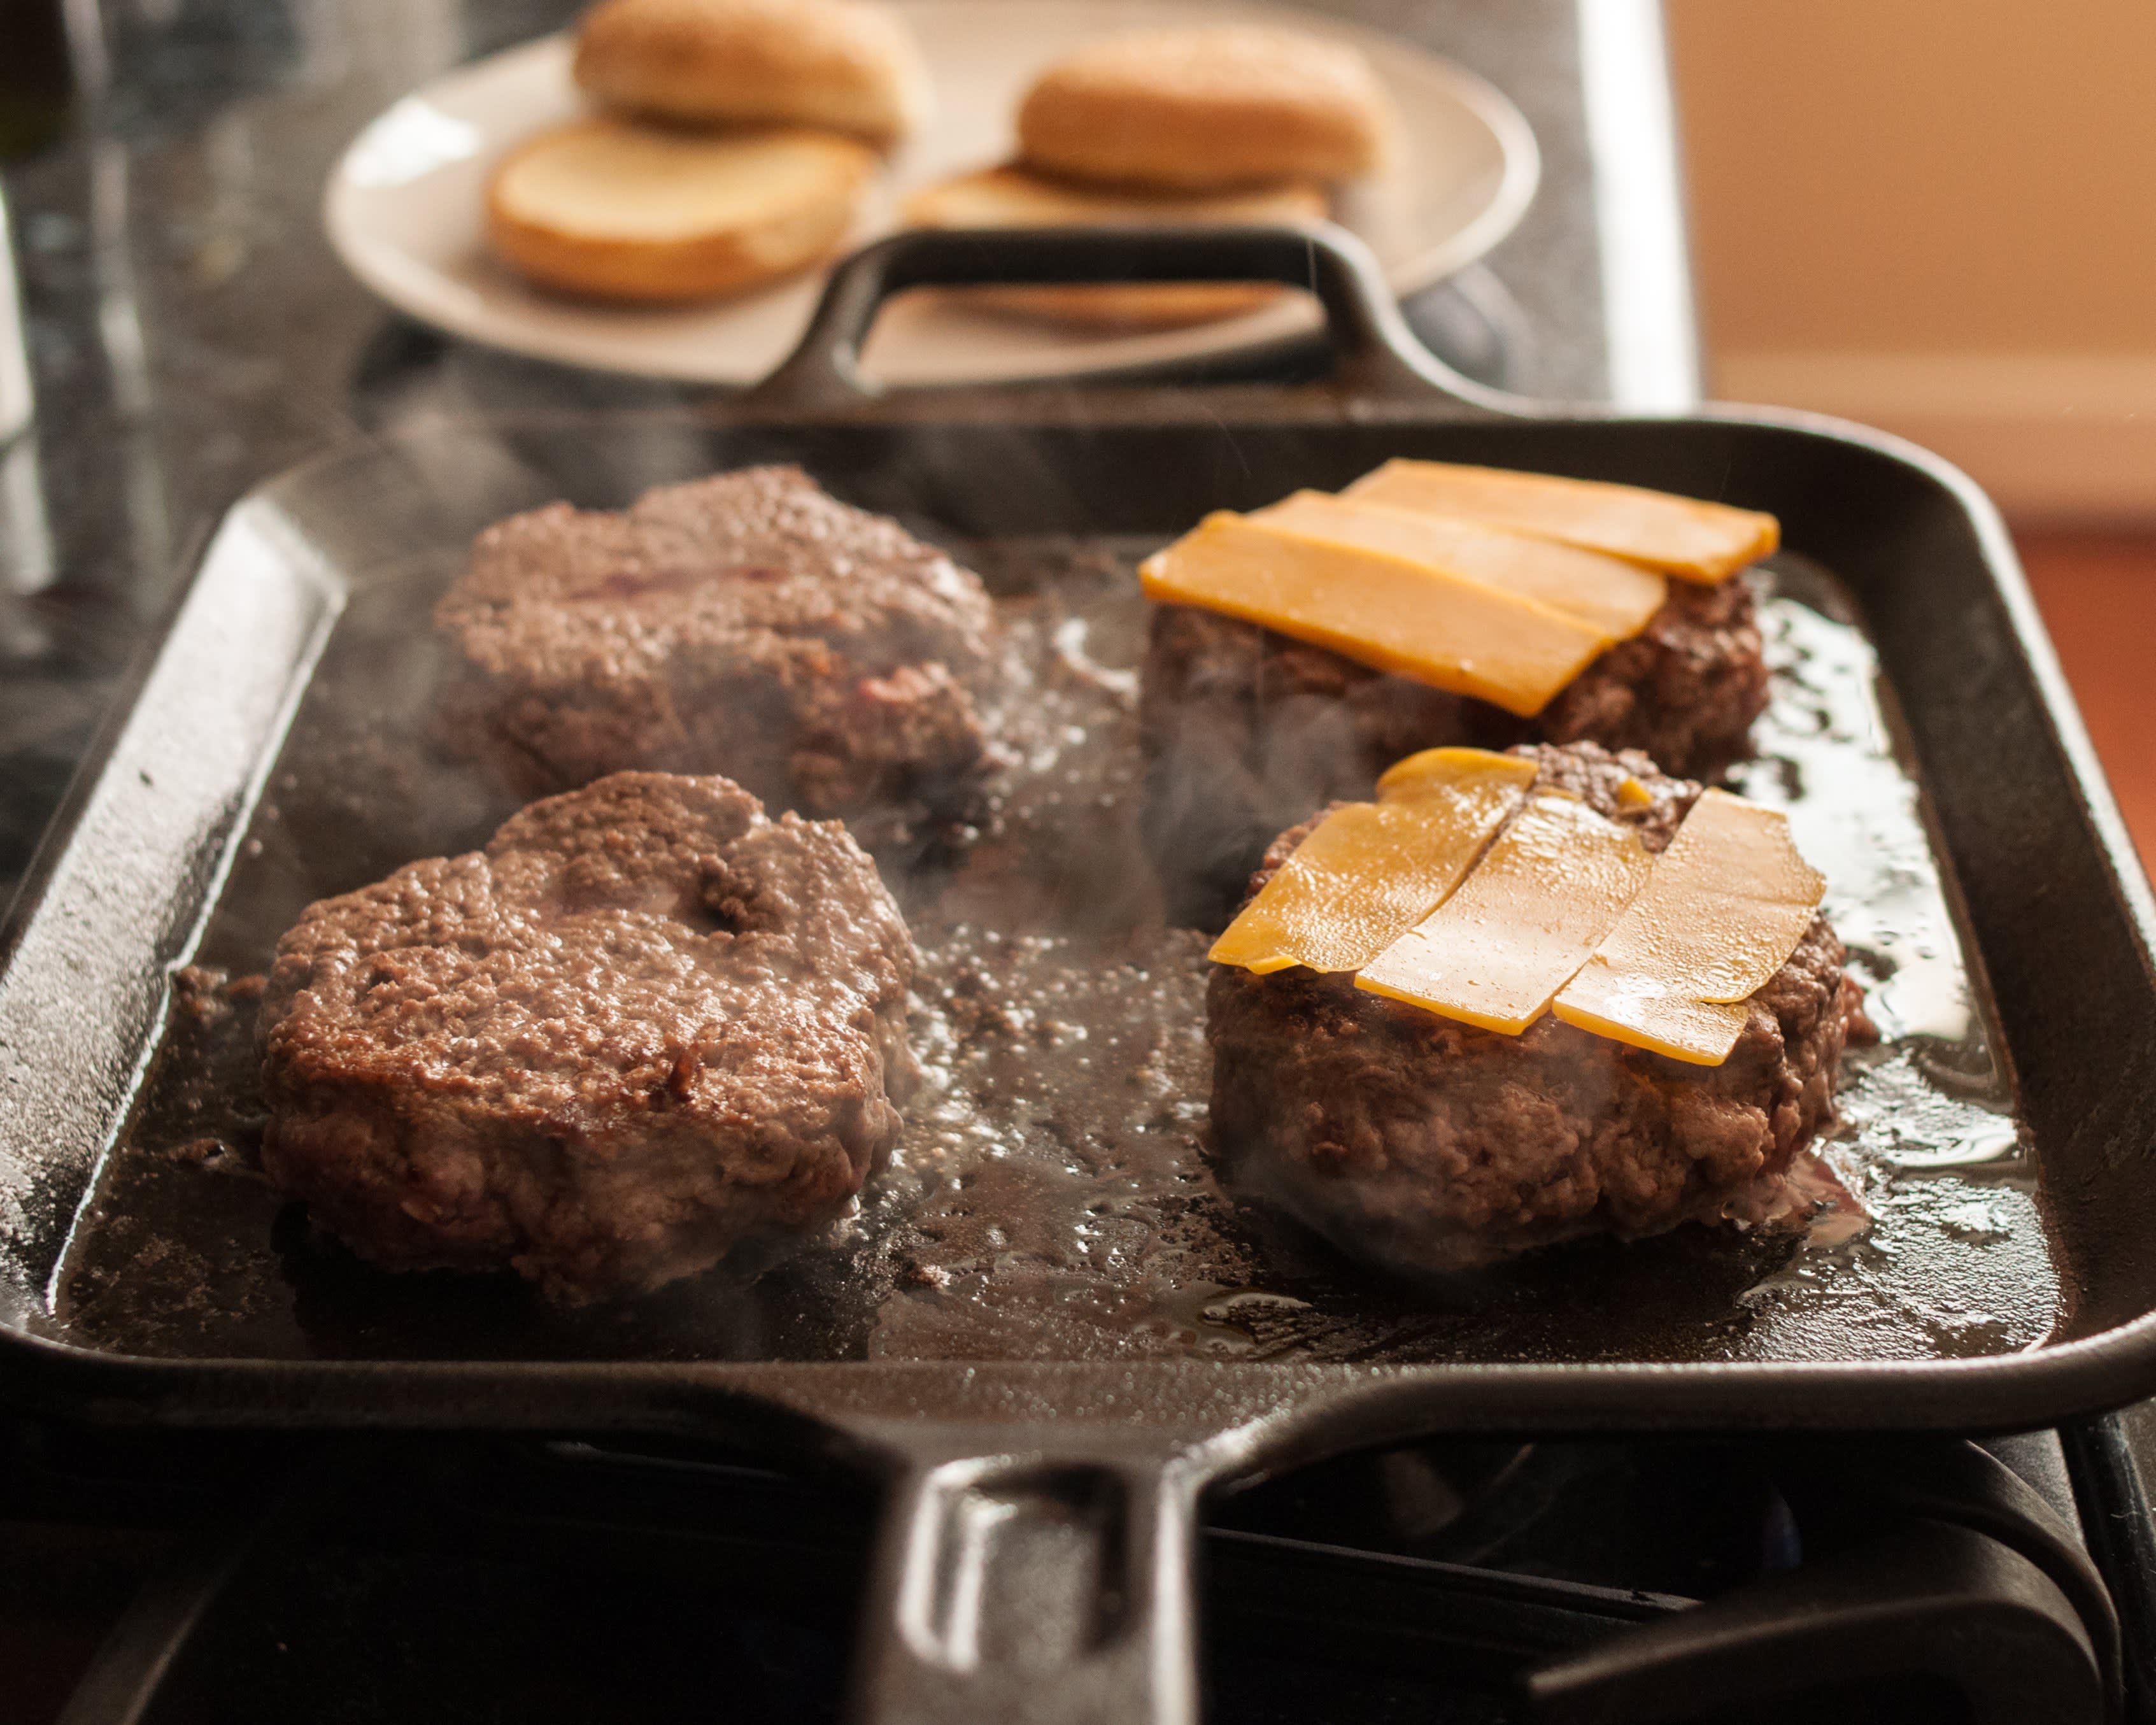 How to Cook Hamburgers on the Stove - Rijal's Blog